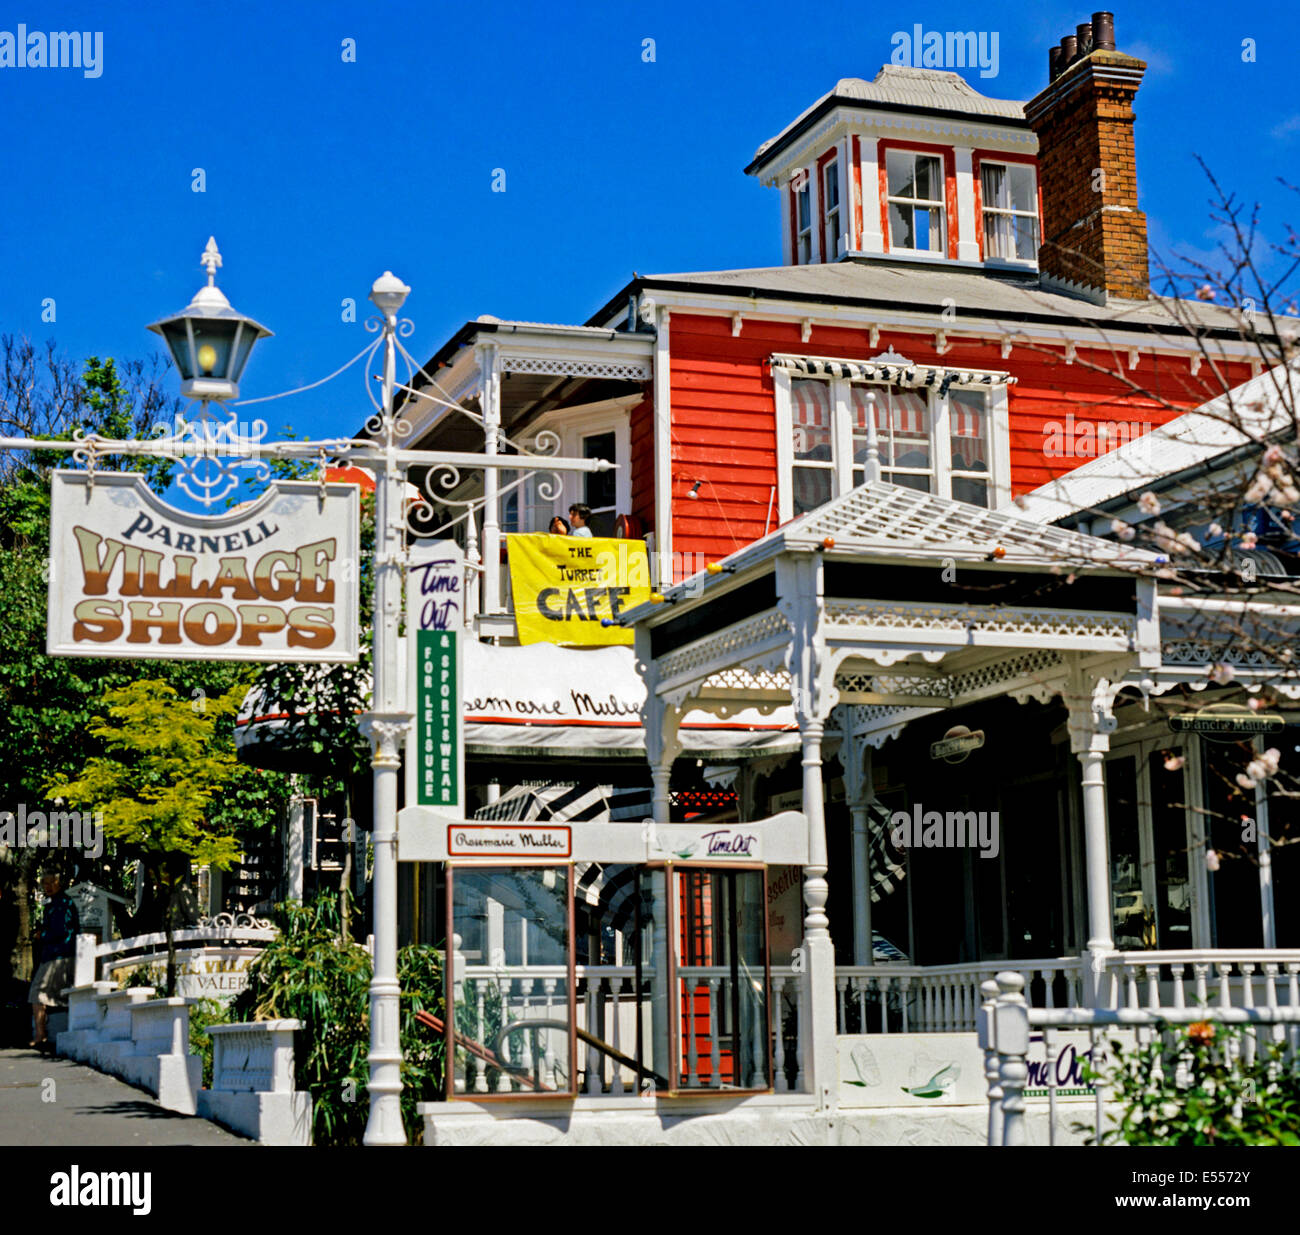 View of Parnell Village Shops, Auckland, New Zealand Stock Photo